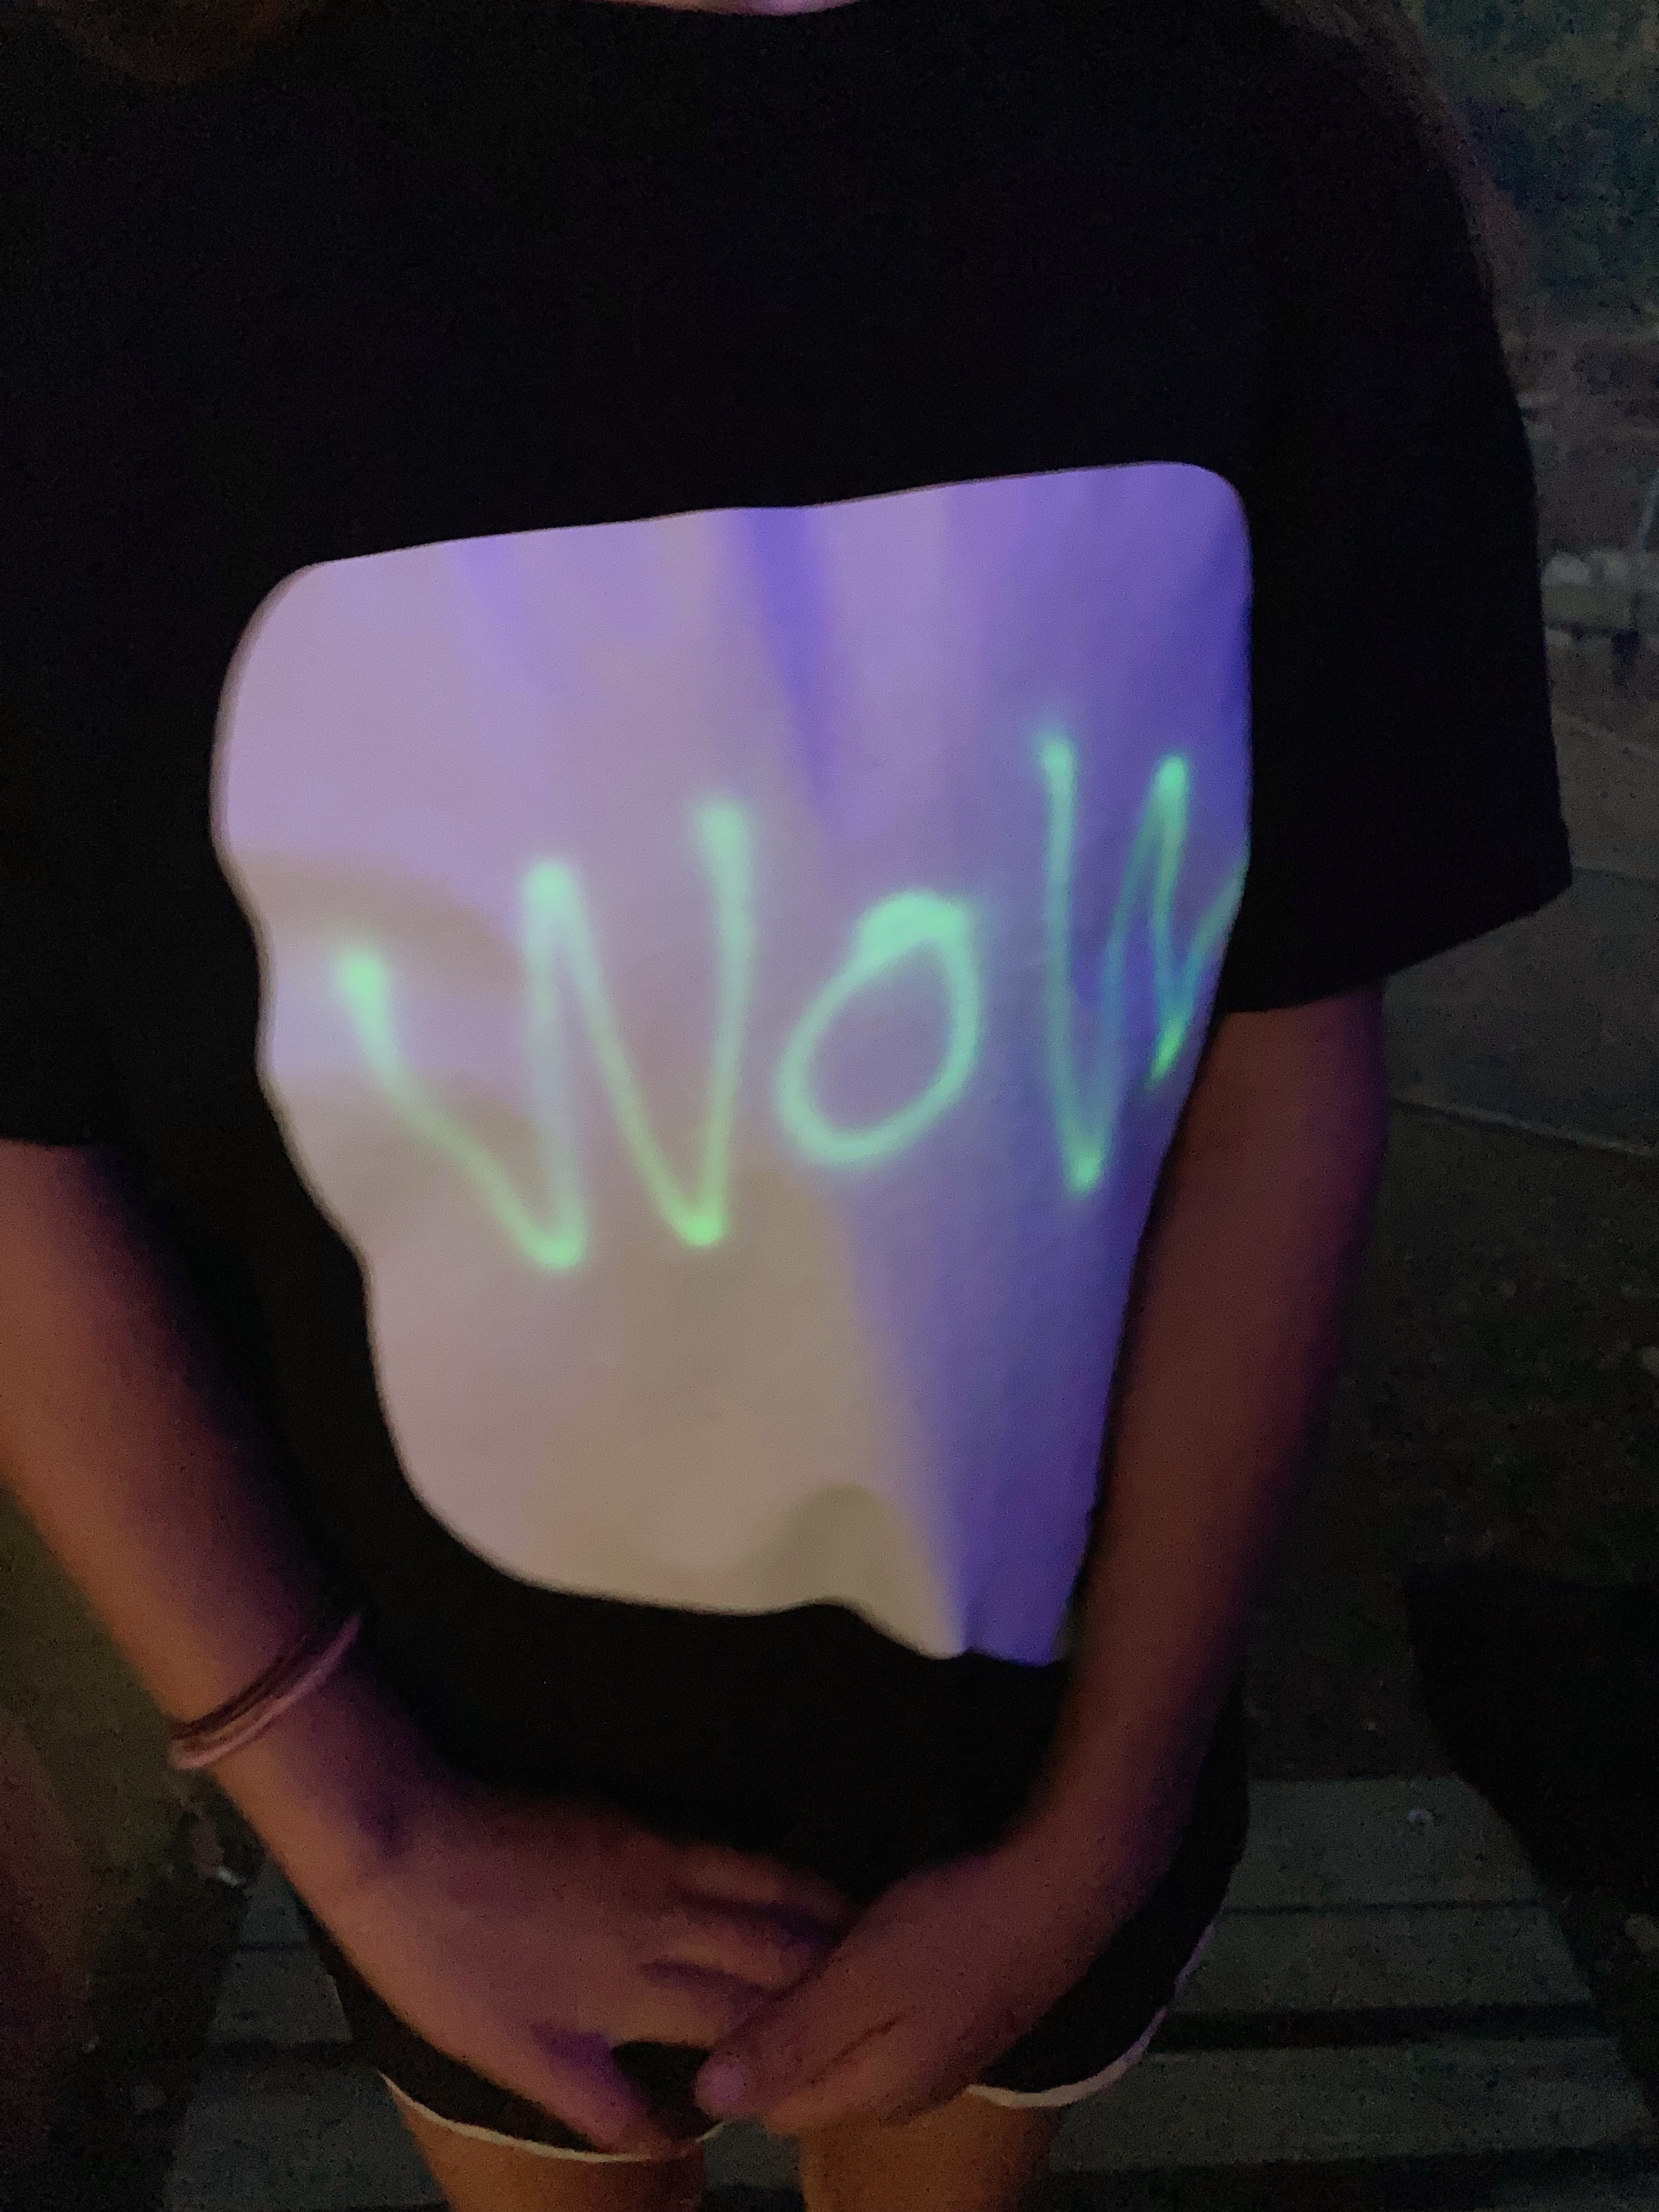 glow-in-the-dark shirt with 'Wow' written on it